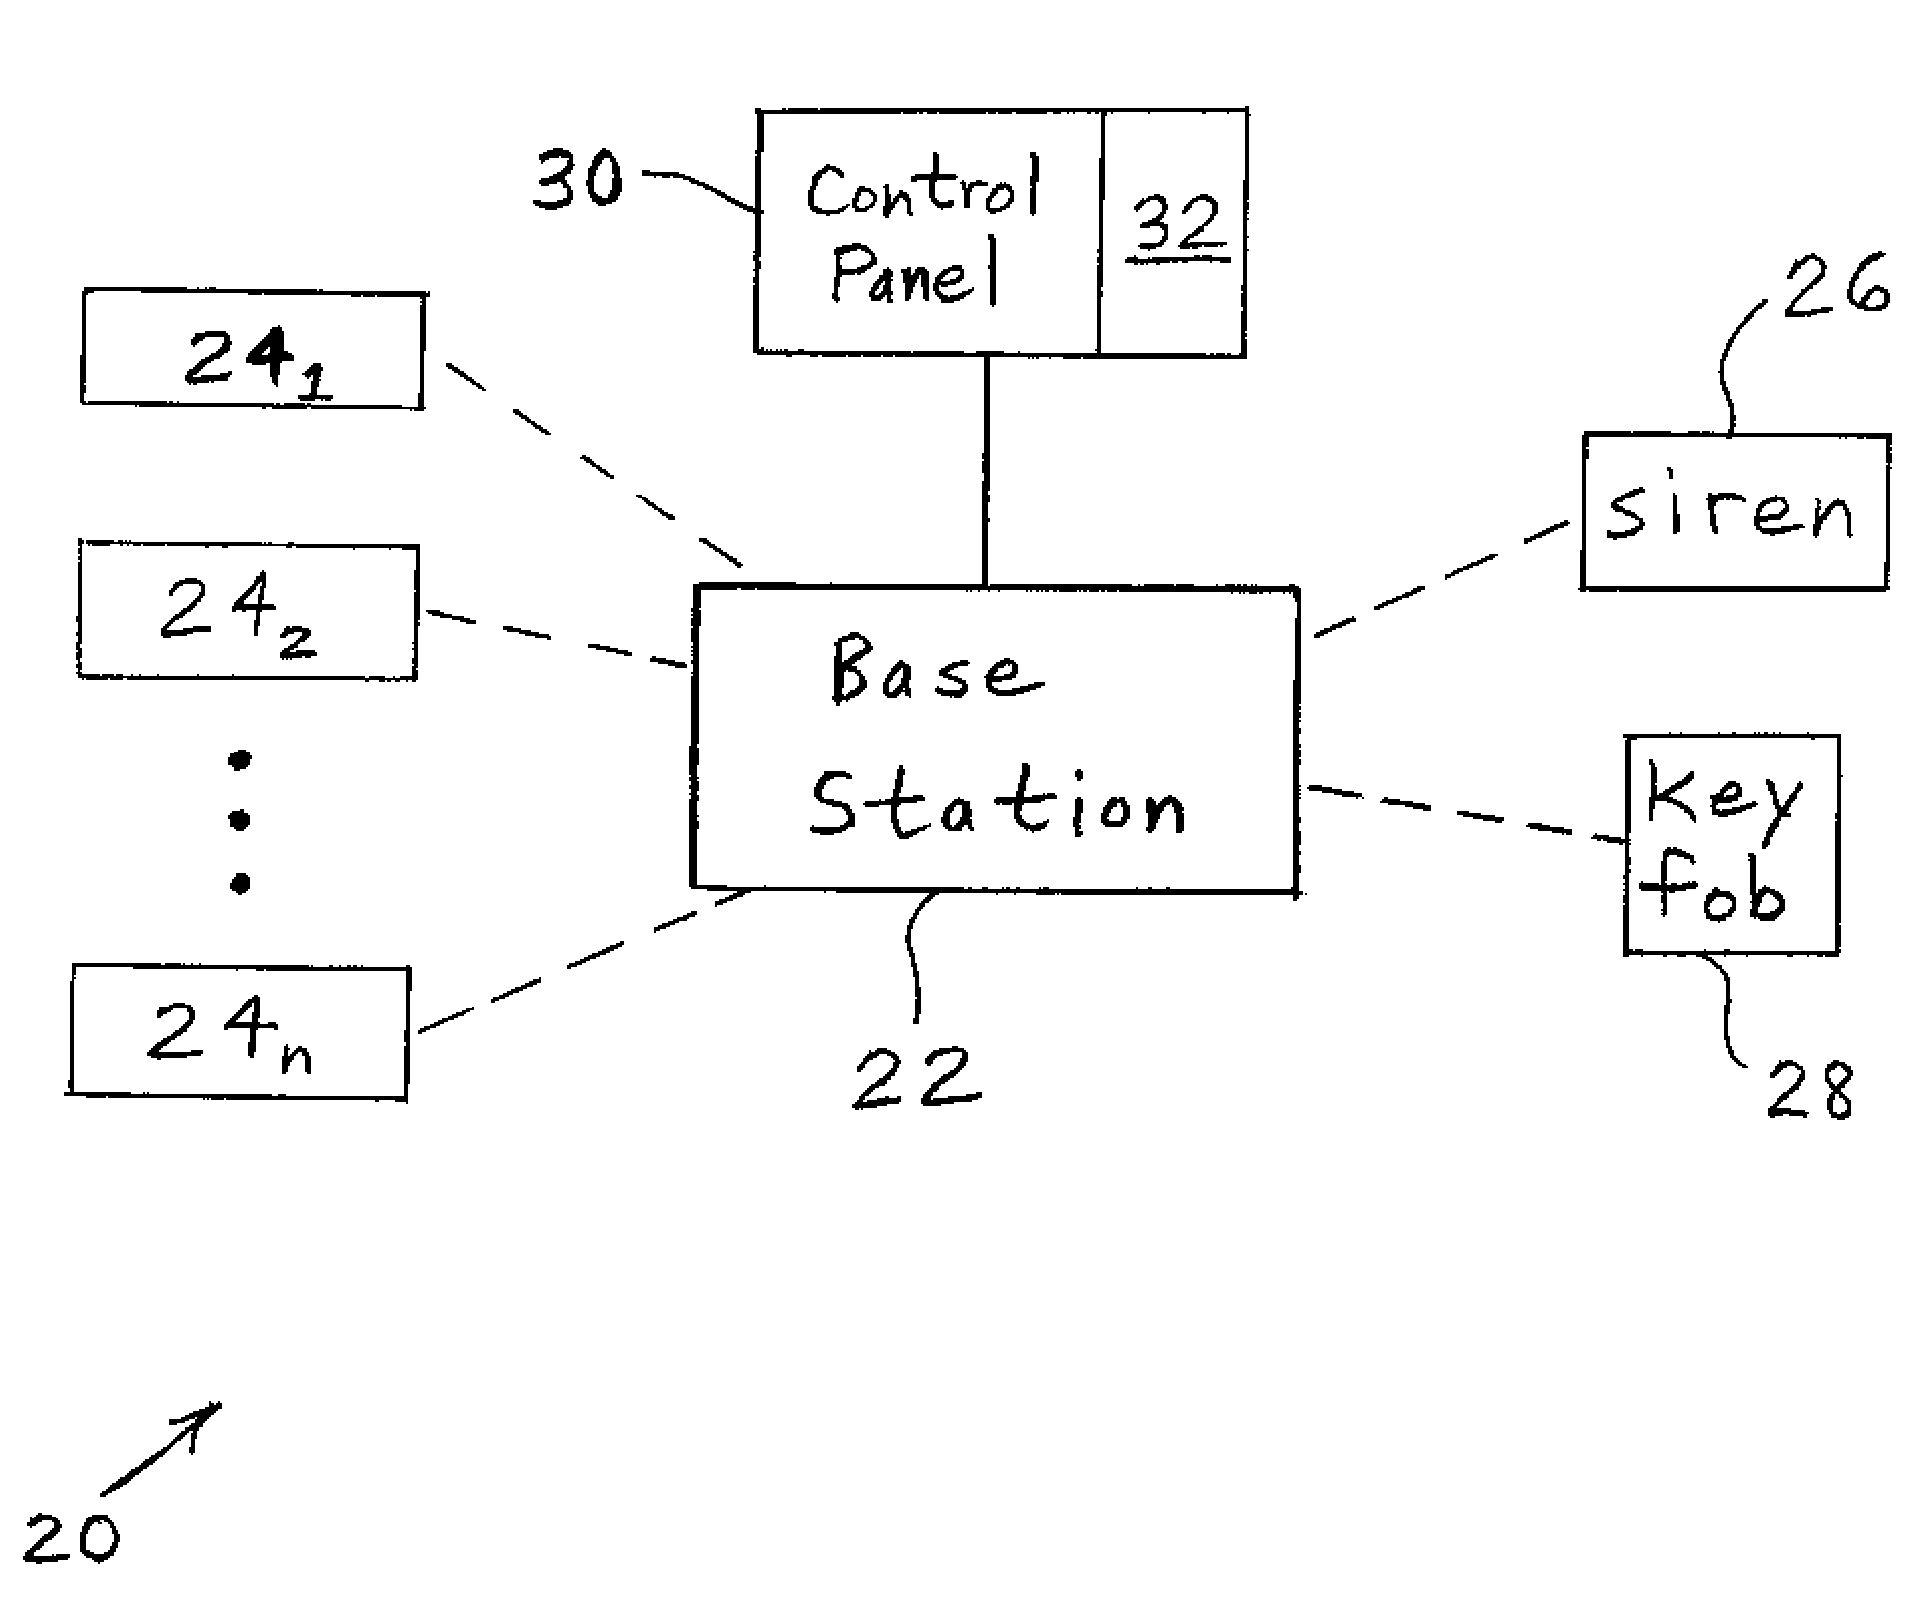 Method of operating an event-driven, delay-critical wireless sensor network